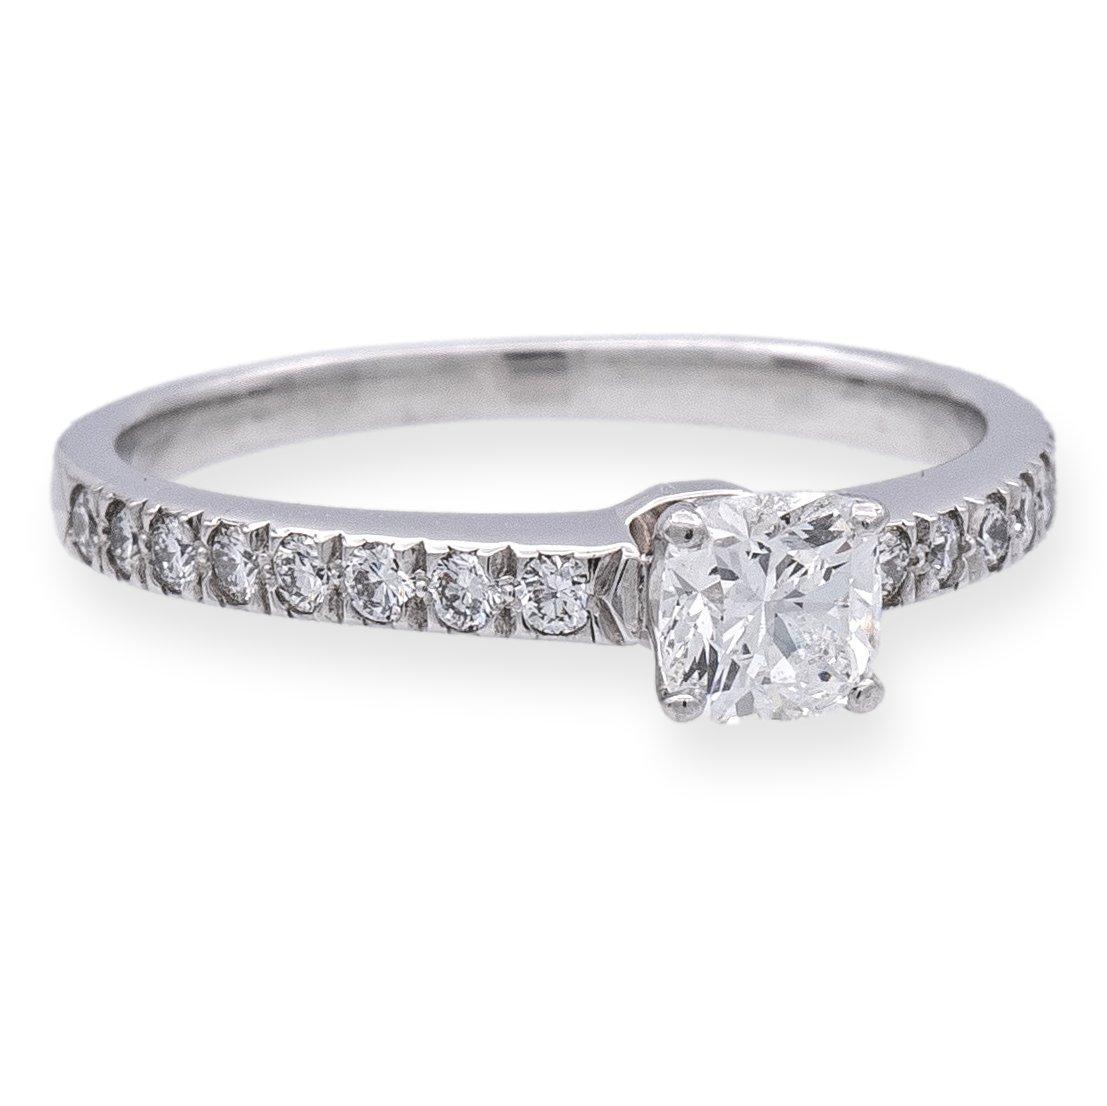 Tiffany & Co. engagement ring from the Novo collection finely crafted in platinum featuring a cushion brilliant diamond center weighing 0.35 carats , G color , VVS2 clarity set in a 4 prong basket setting adorned with 16 bead set round brilliant cut